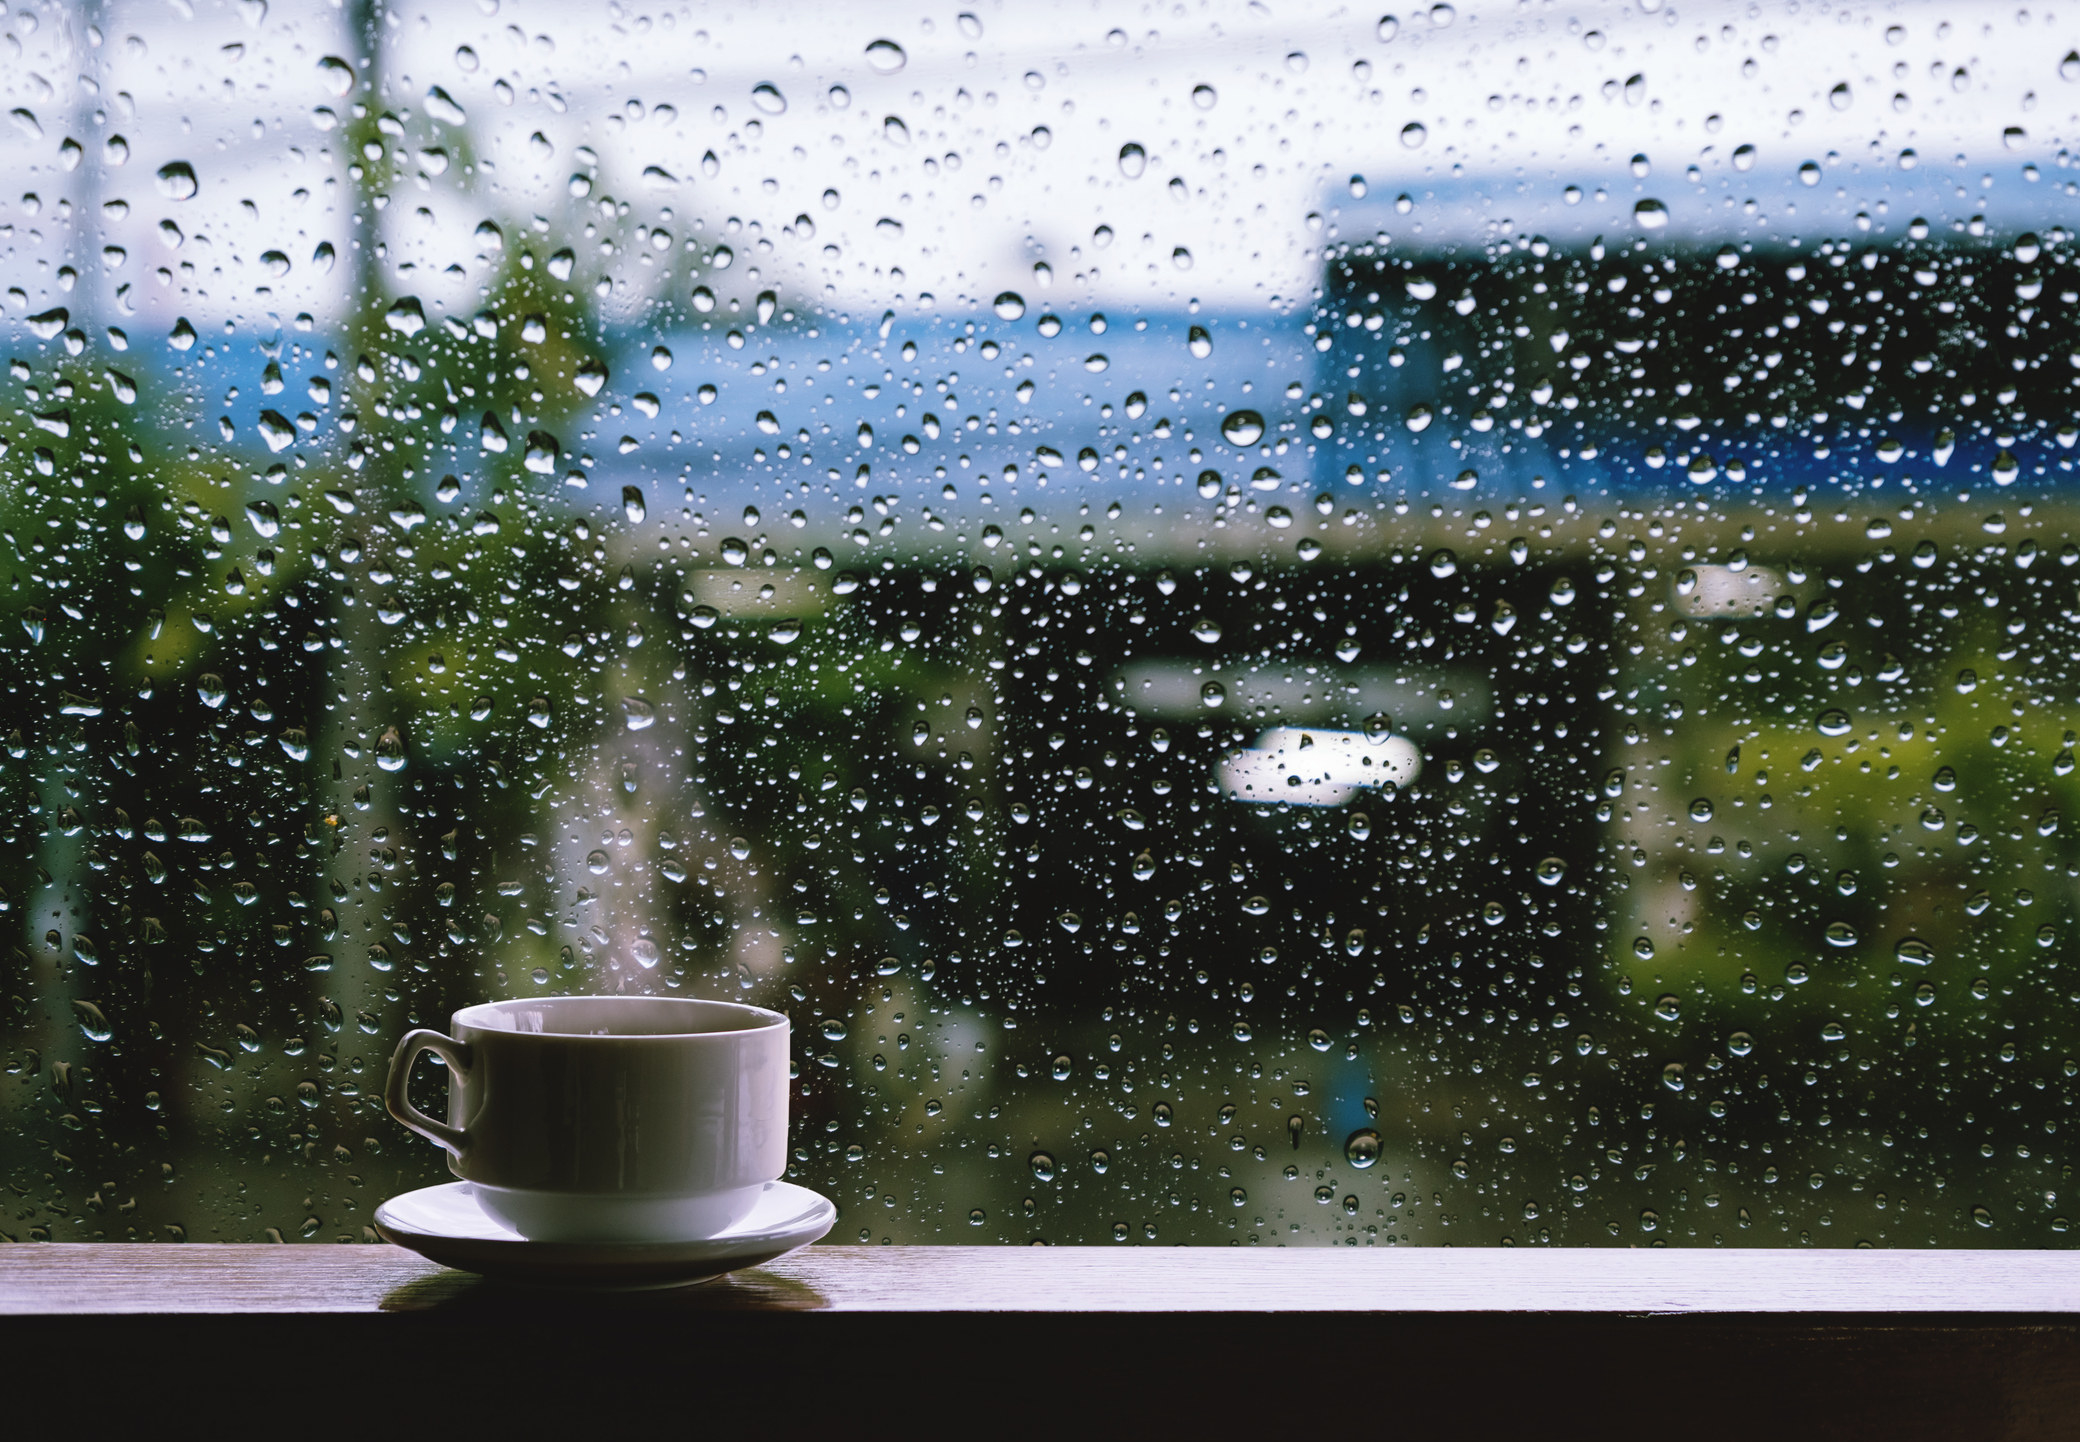 A hot coffee cup and a rainy window.